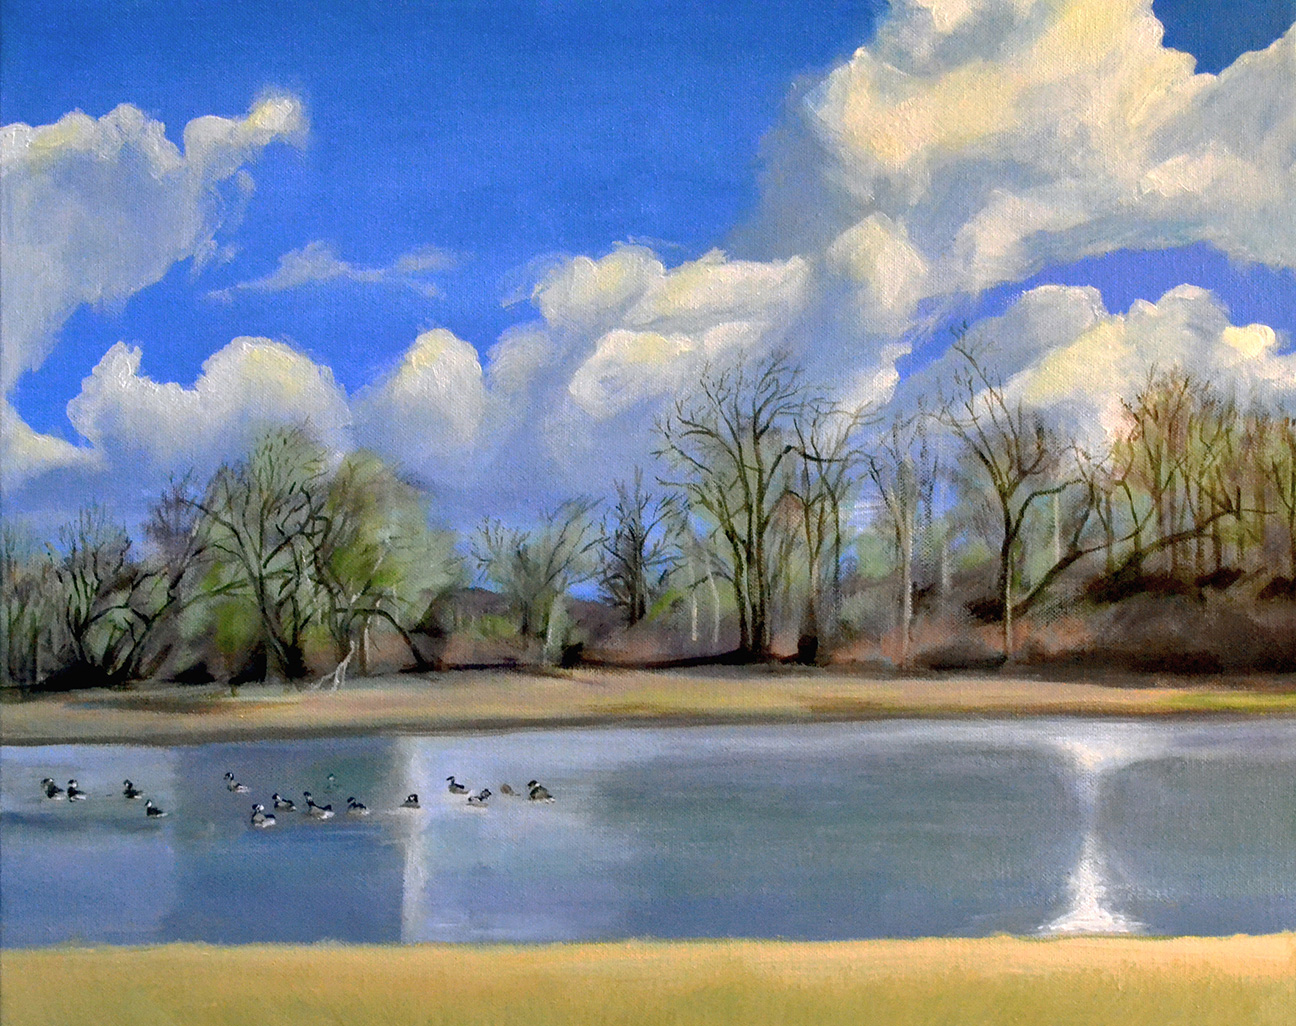 Watering Hole with Geese, Acrylic on canvas, 16 x 20